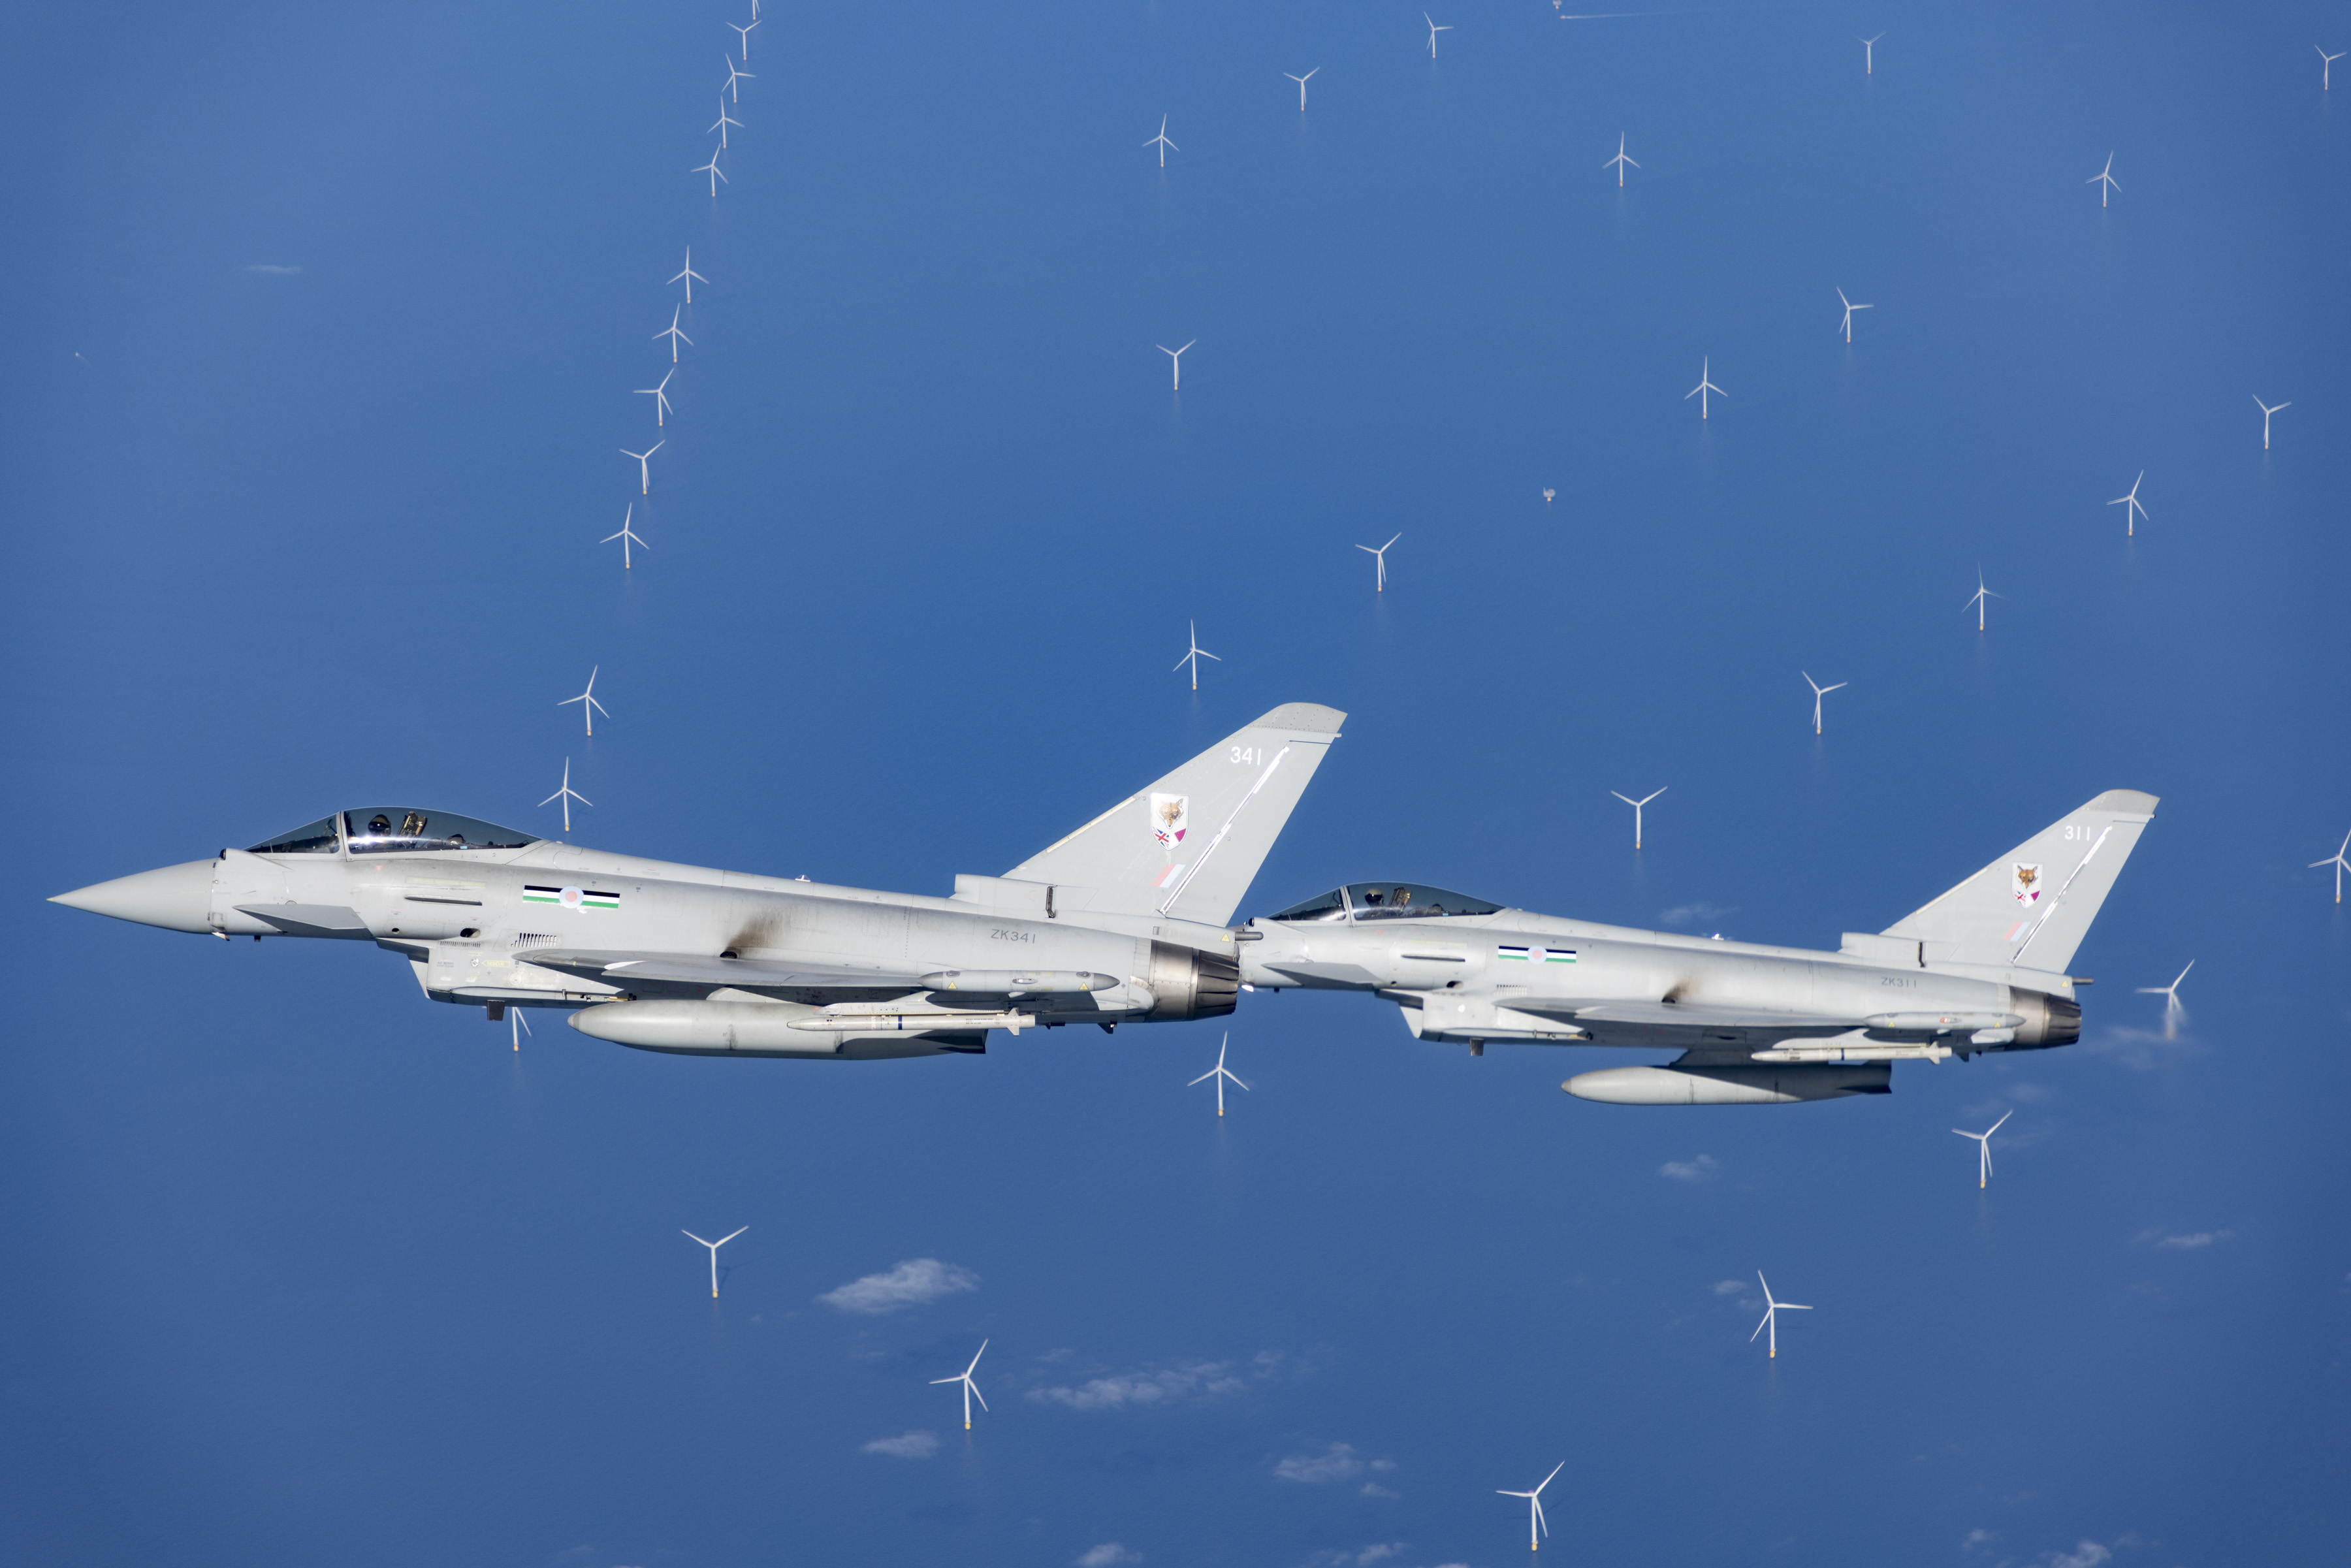 The Royal Air Force has successfully completed a Voyager air-to-air refuelling flight, powered by an approximately 43% blend of Sustainable Aviation Fuel (SAF).